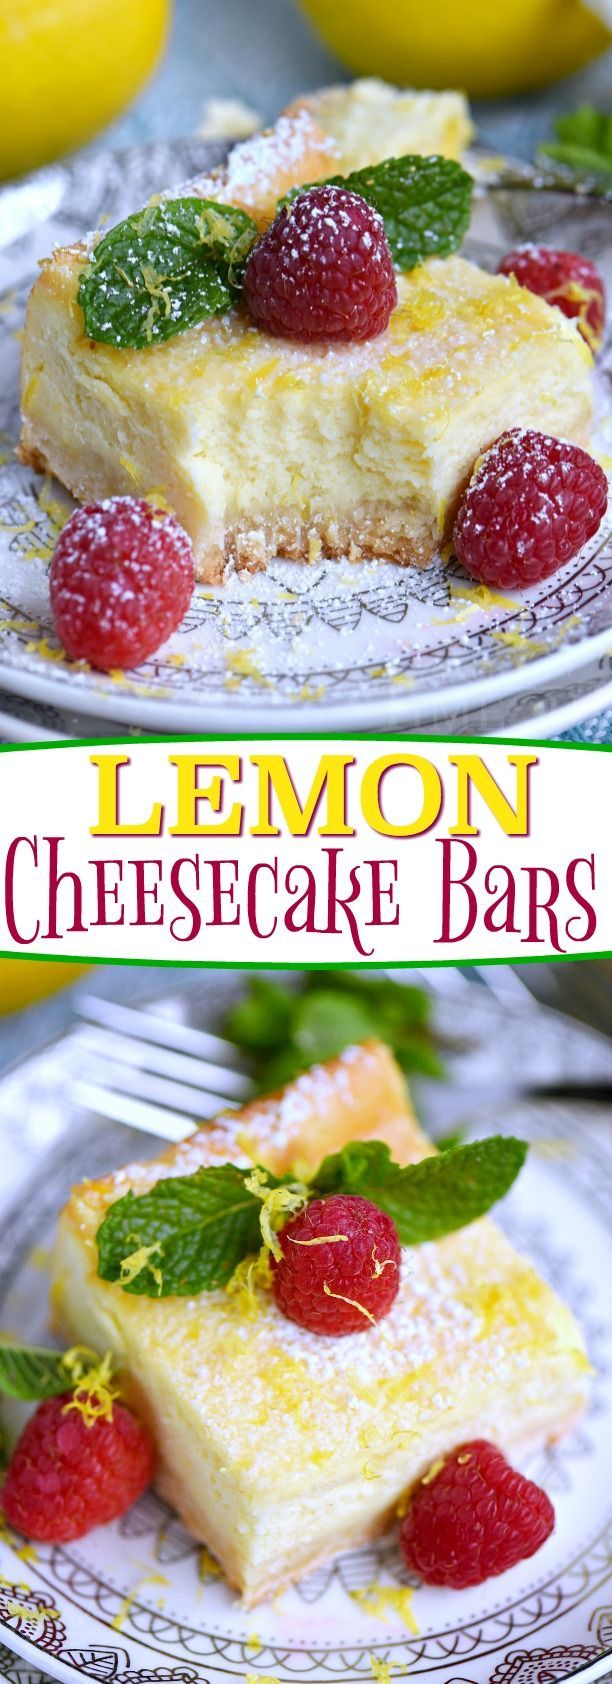 My Aunt Pams Lemon Cheesecake Bars are made with lots of fresh lemon juice and zest so theyre bursting with lemon flavor! Extra